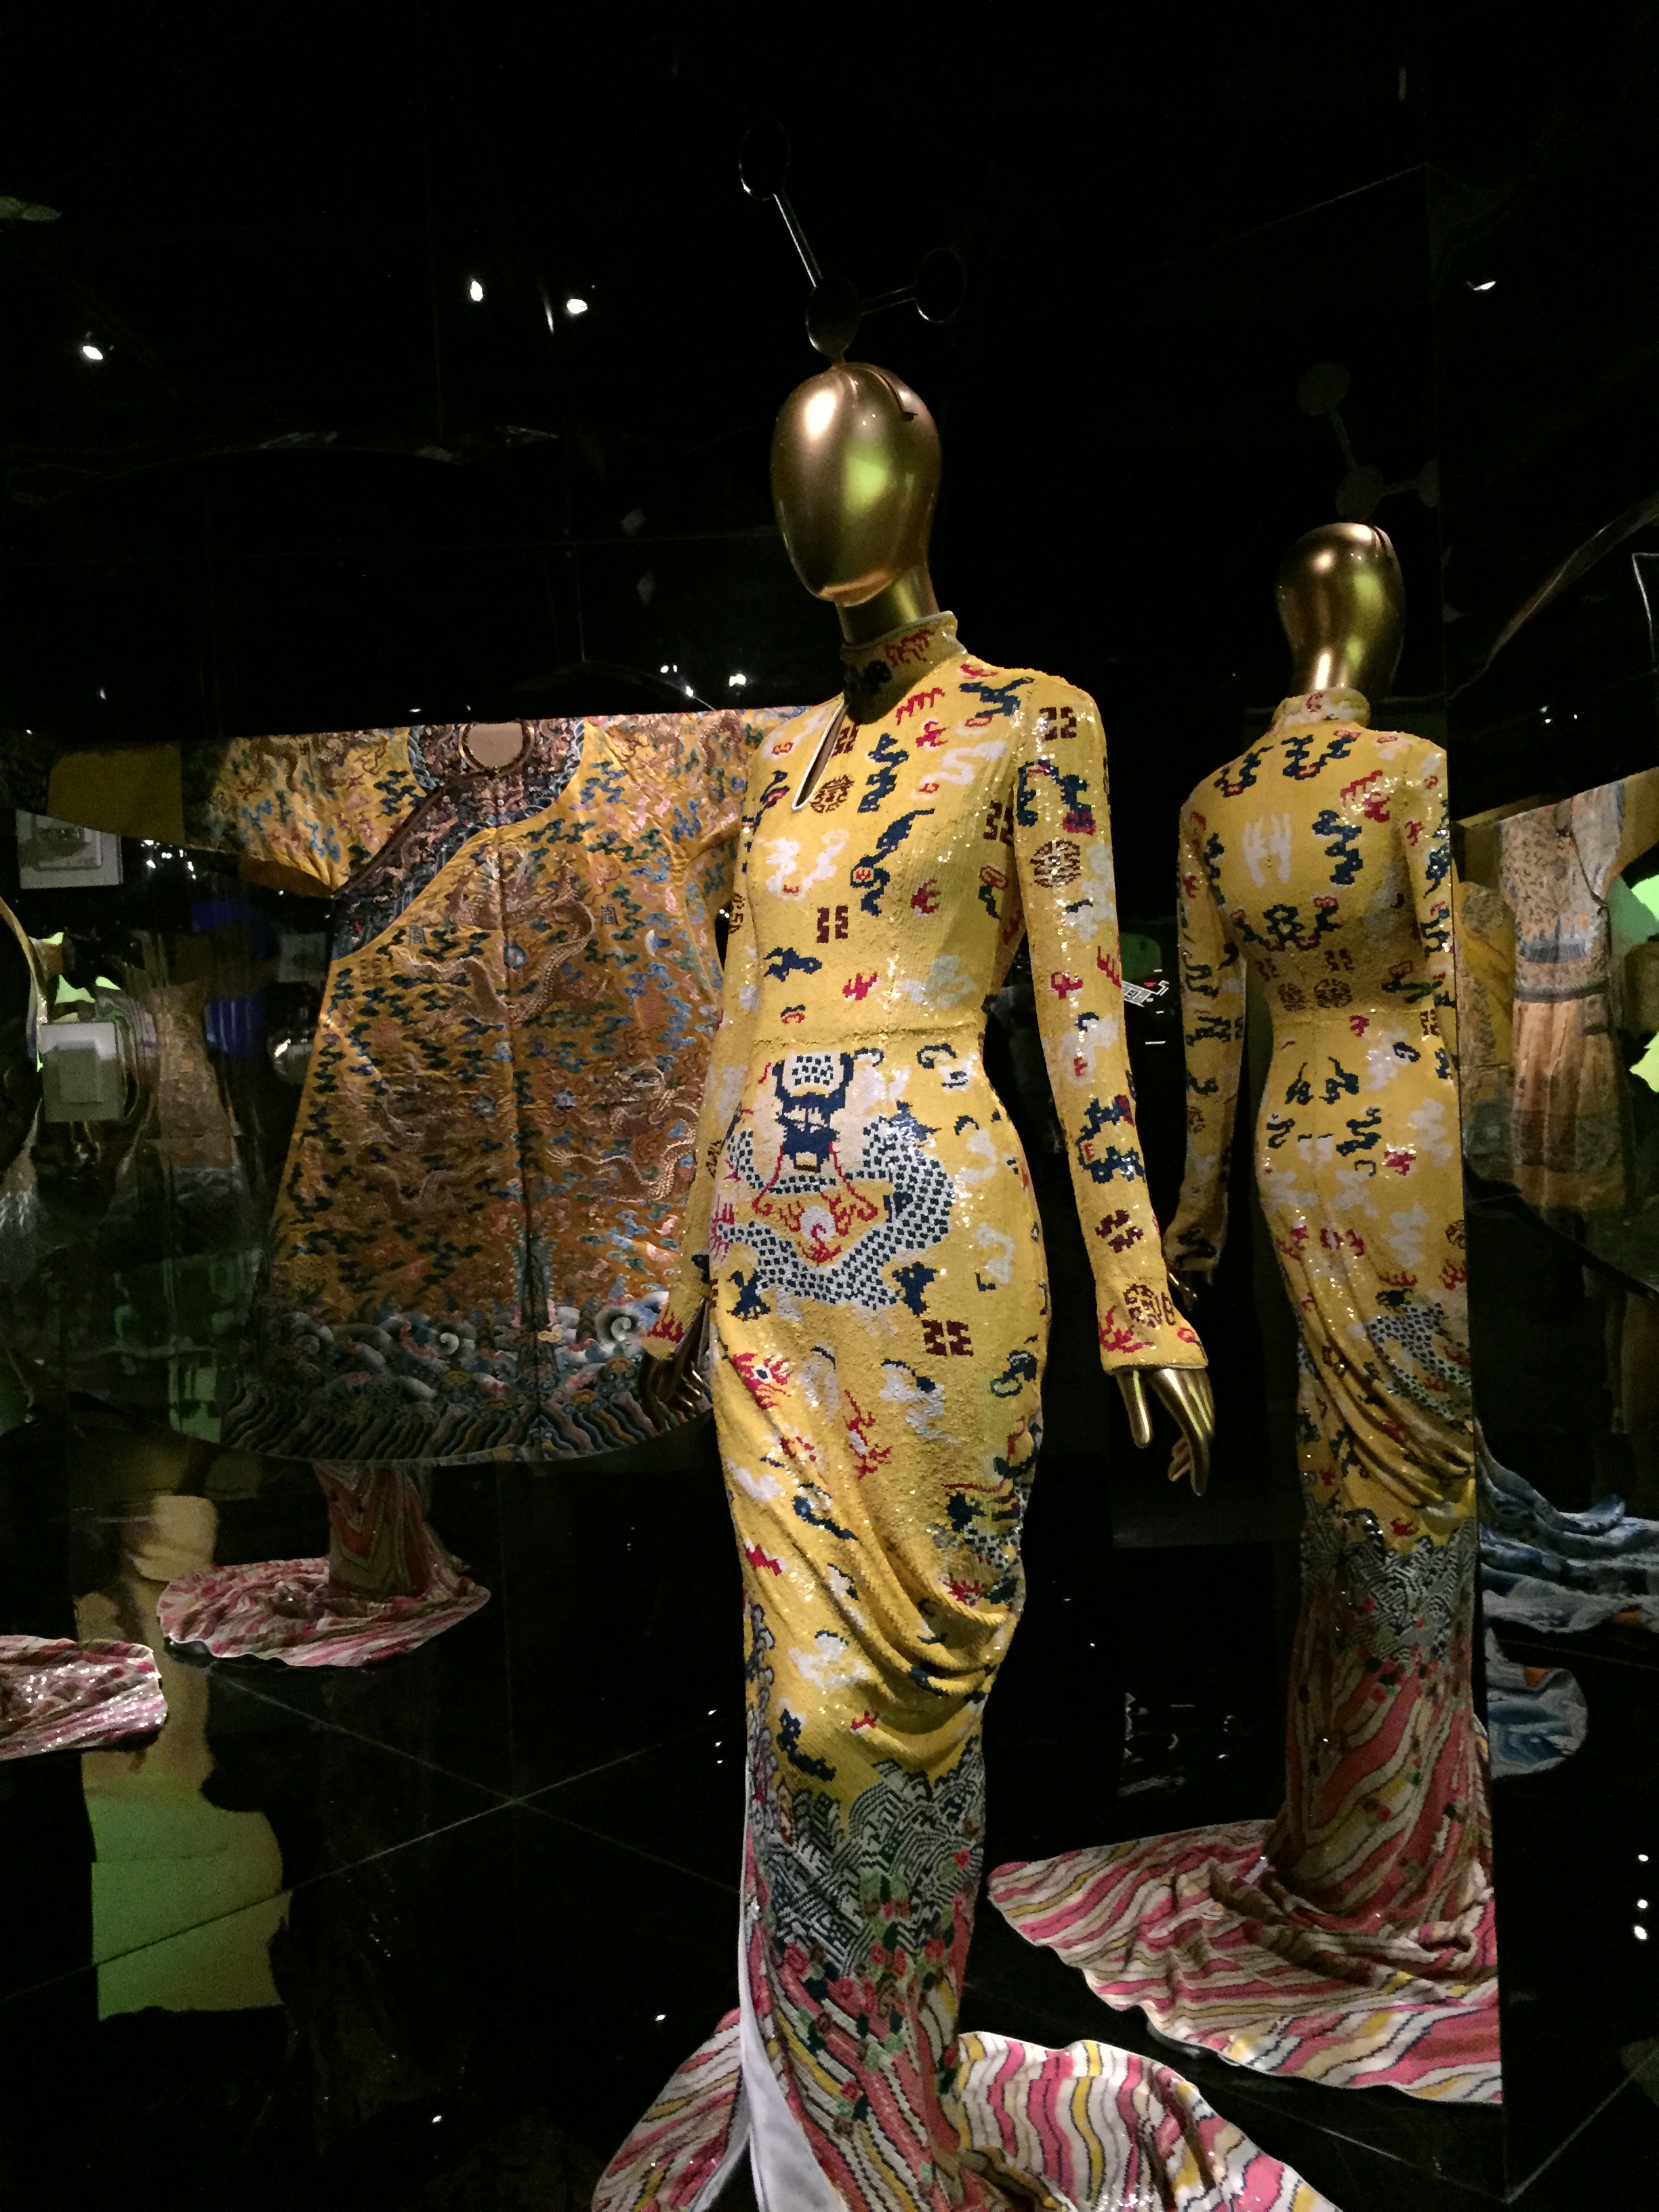 Searching in vain for China in Anna Wintour’s Met exhibit | Inquirer ...